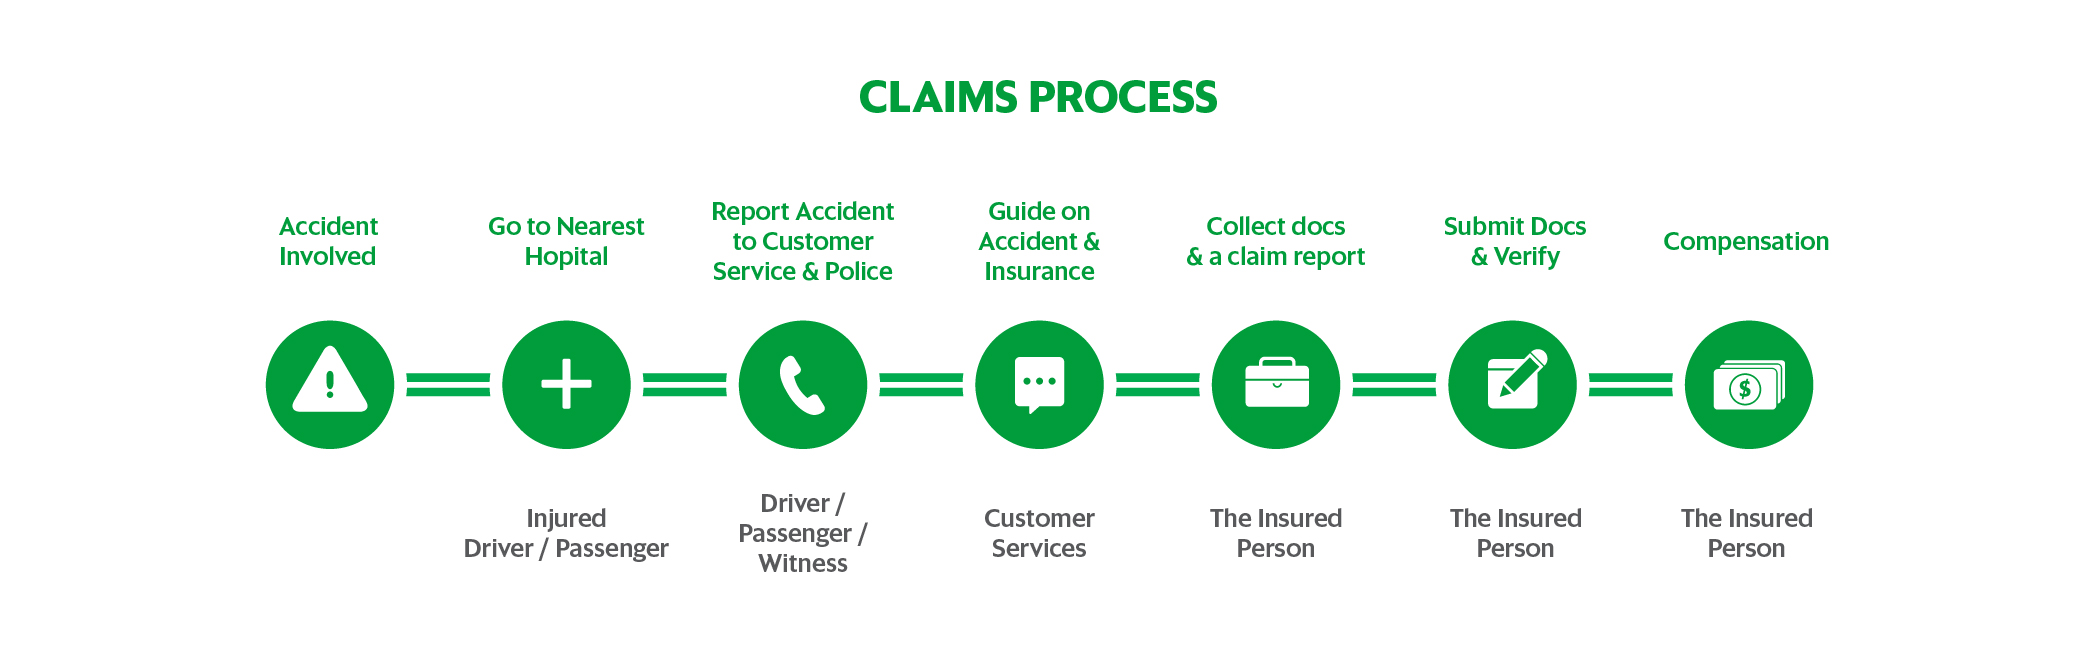 Claims Process 